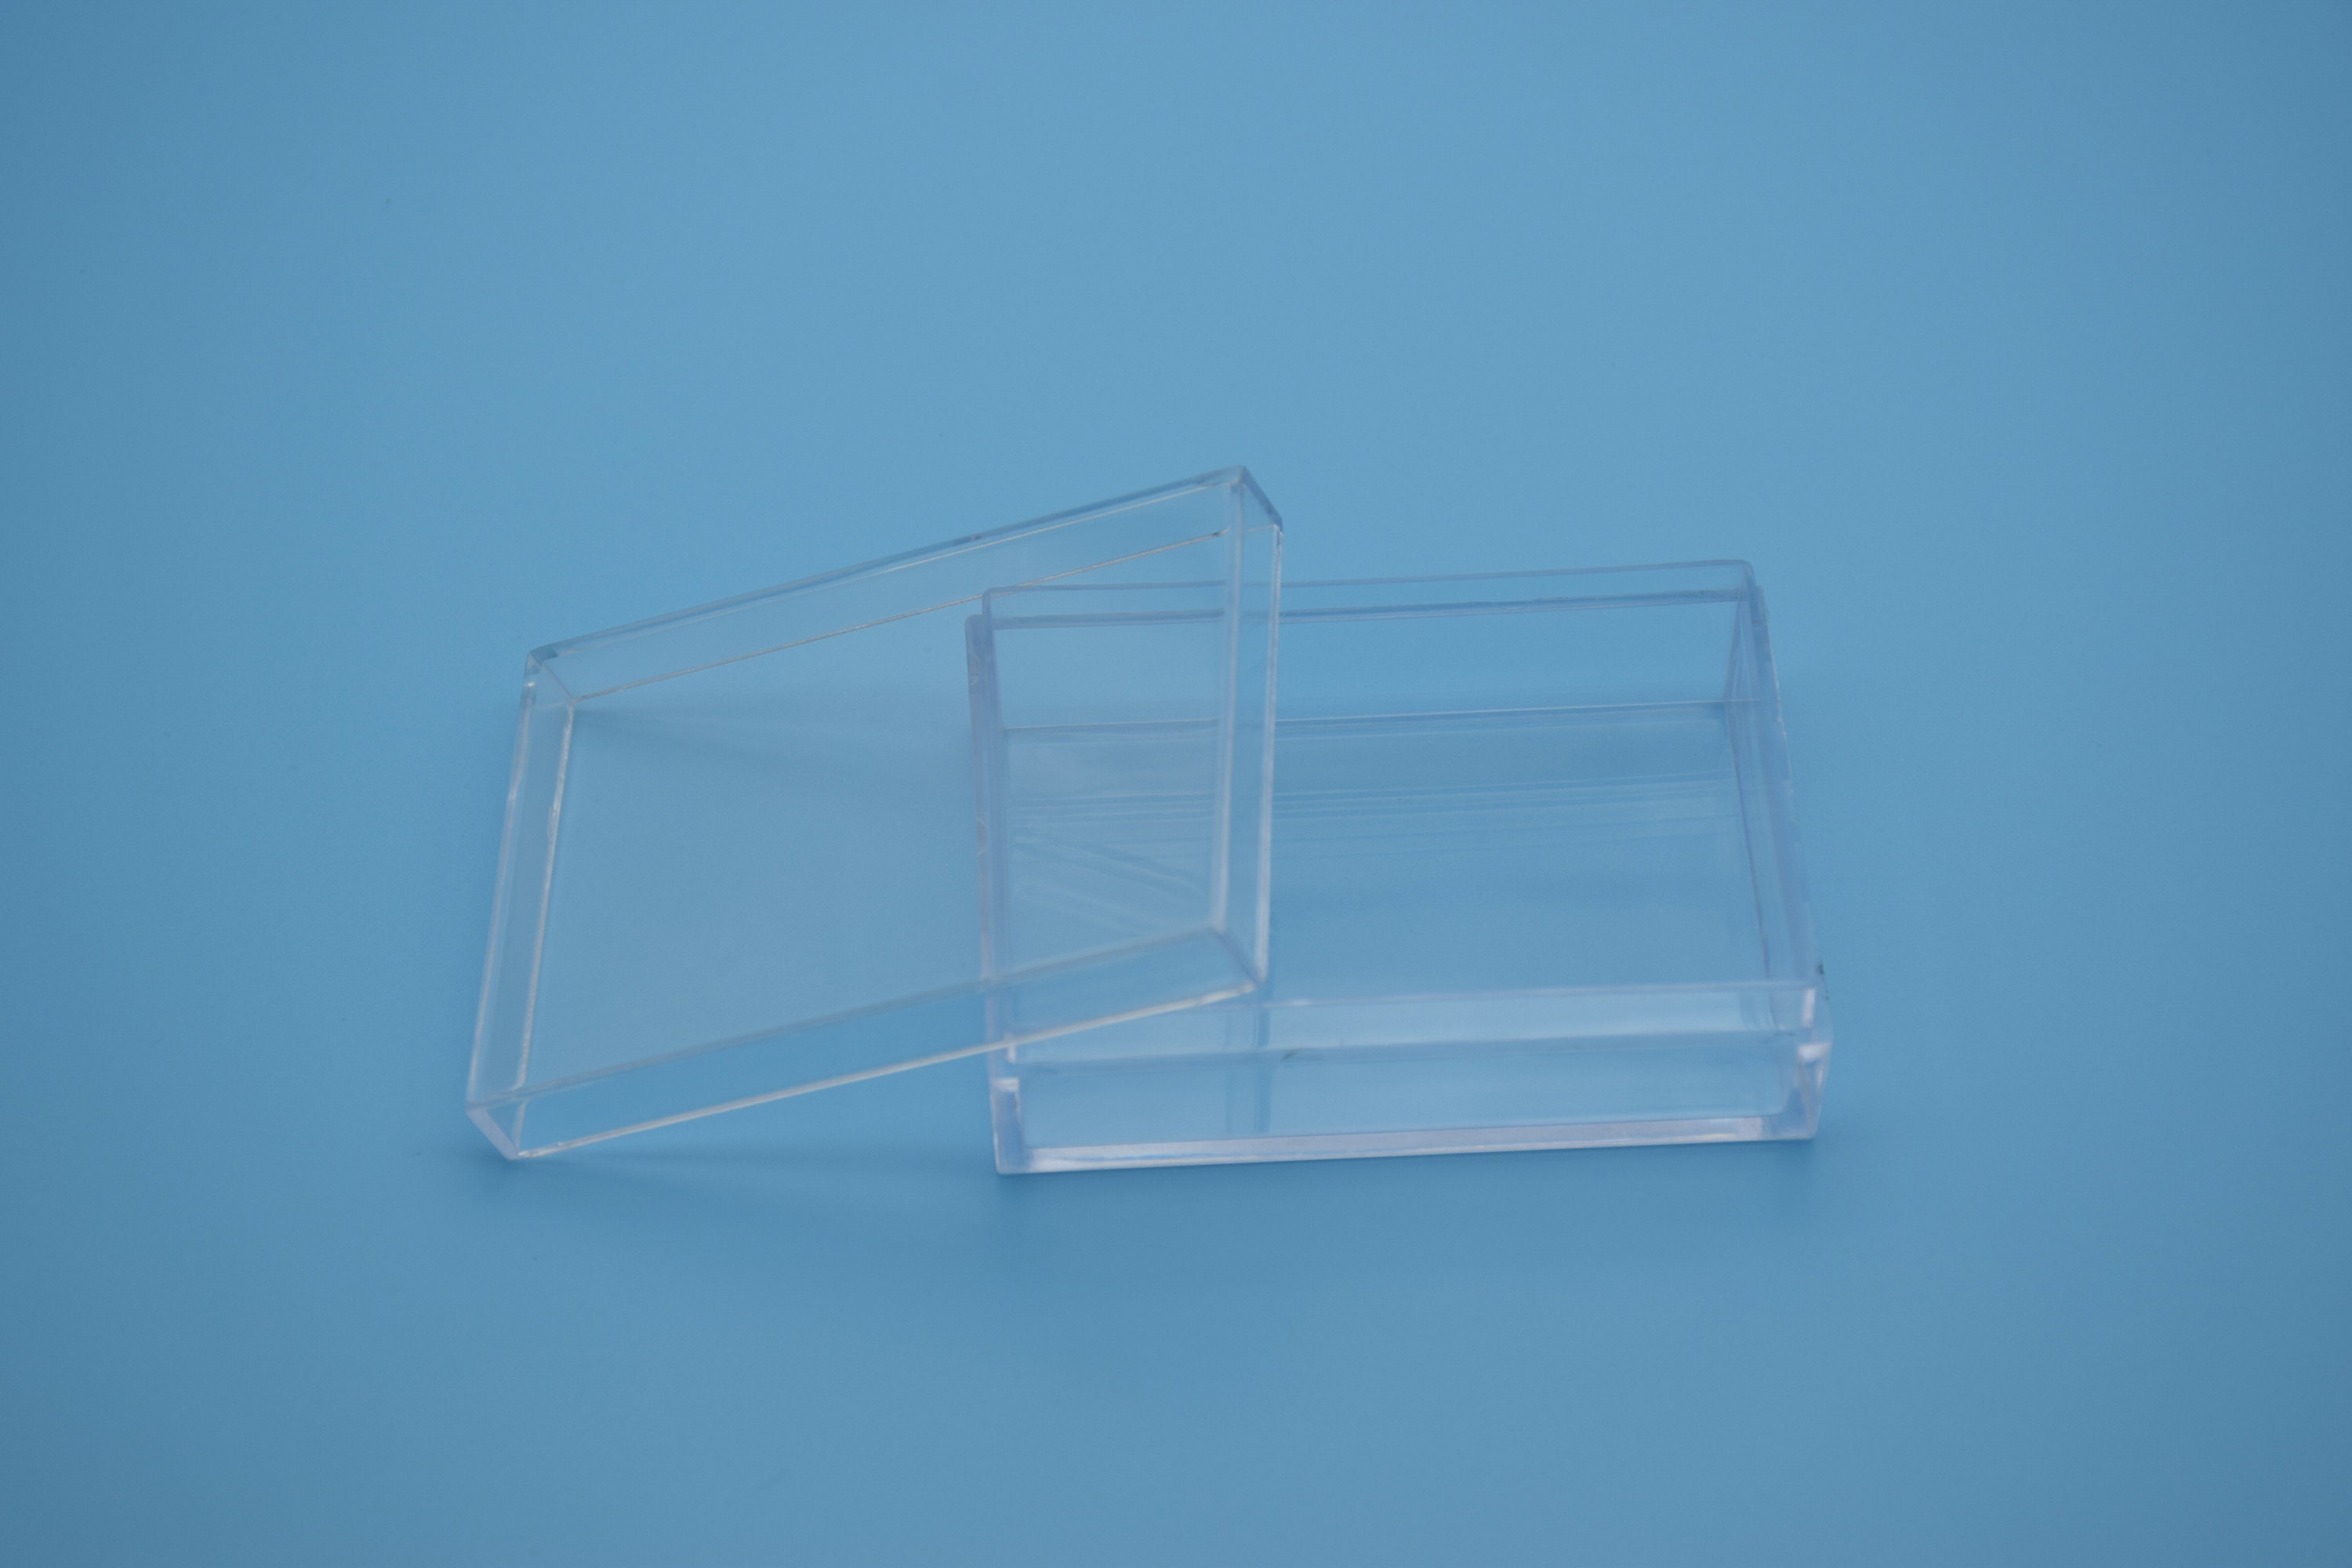 Square Clear Plastic Hinged Boxes - 9-1/2″ x 6-1/4″ x 1-9/16″